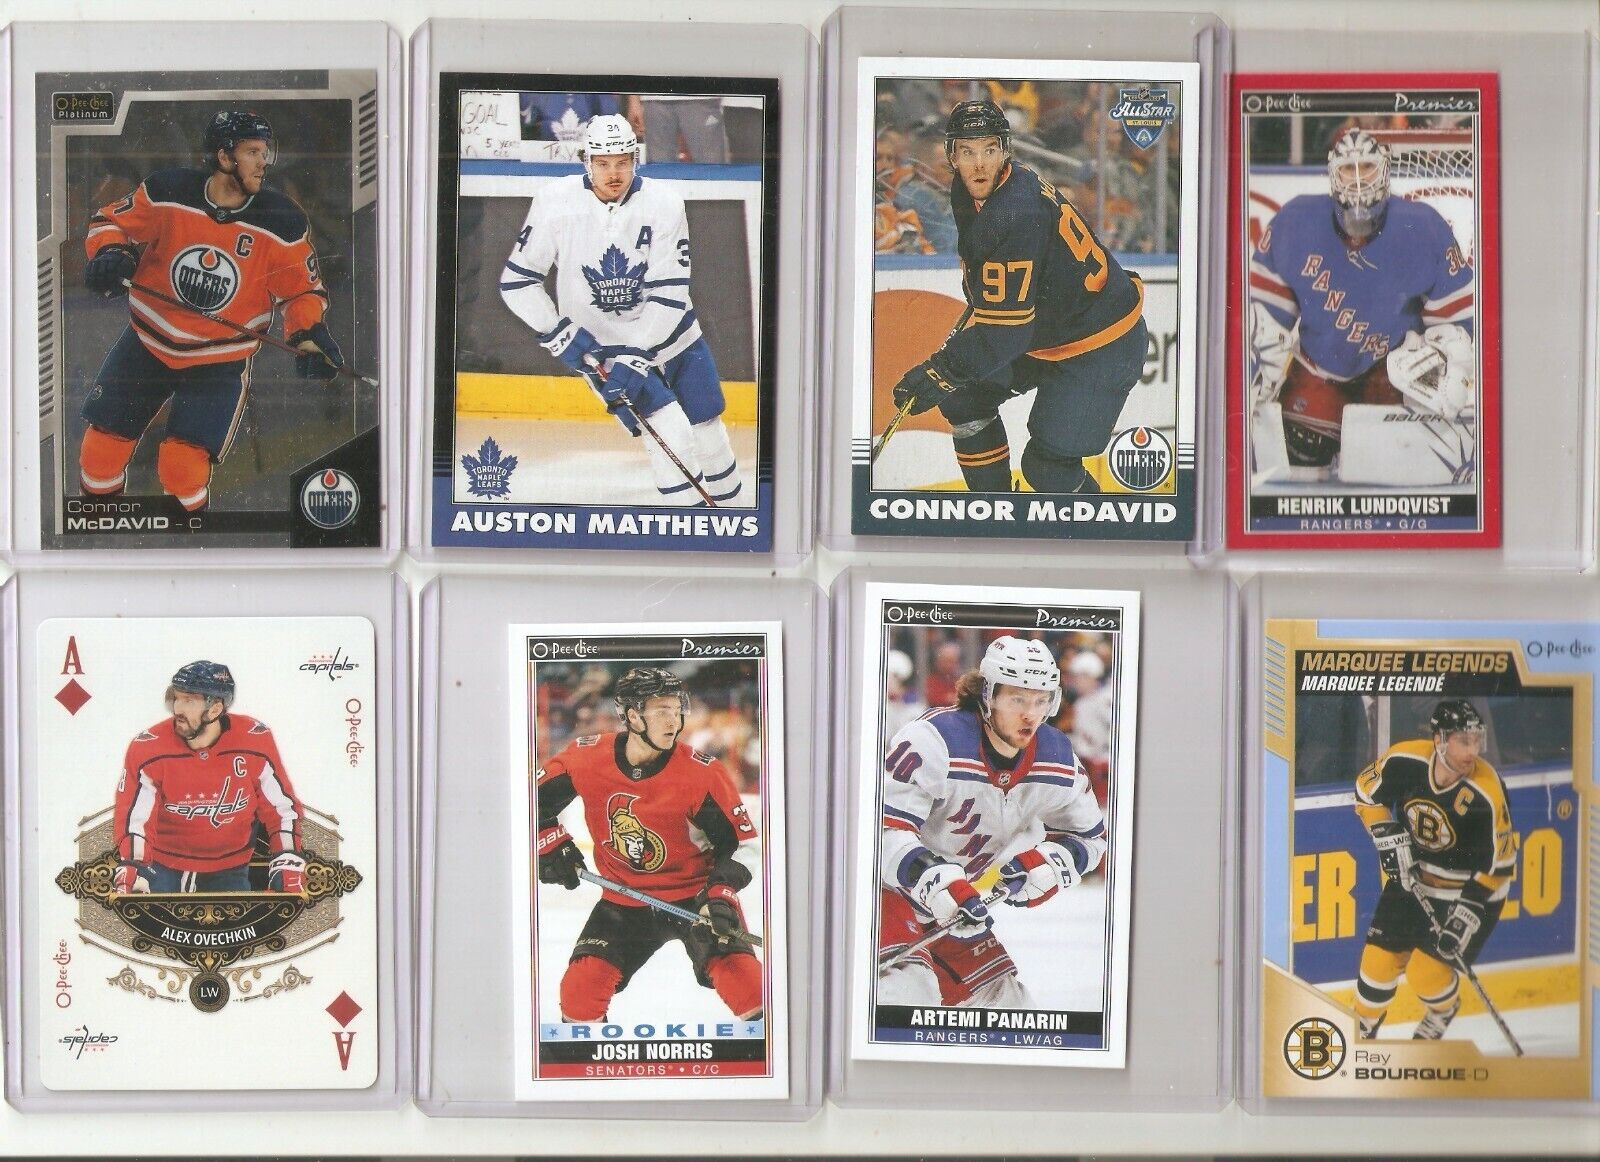 20-21 OPC Marquee Legends Blue SP Ray Bourque